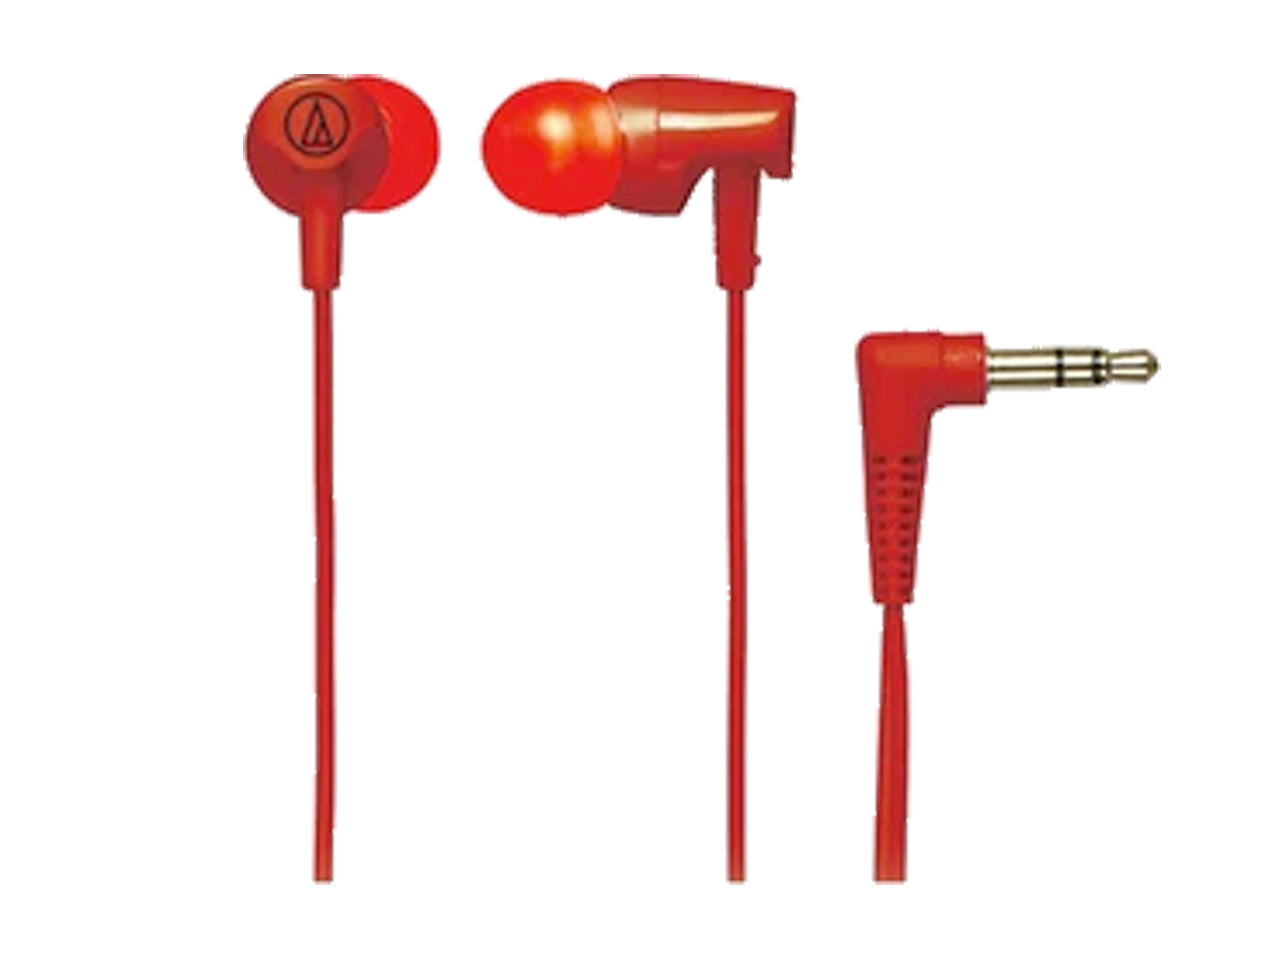 AUDIO-TECHNICA IN-EAR HEADPHONE WITH CORD WRAP (Red)